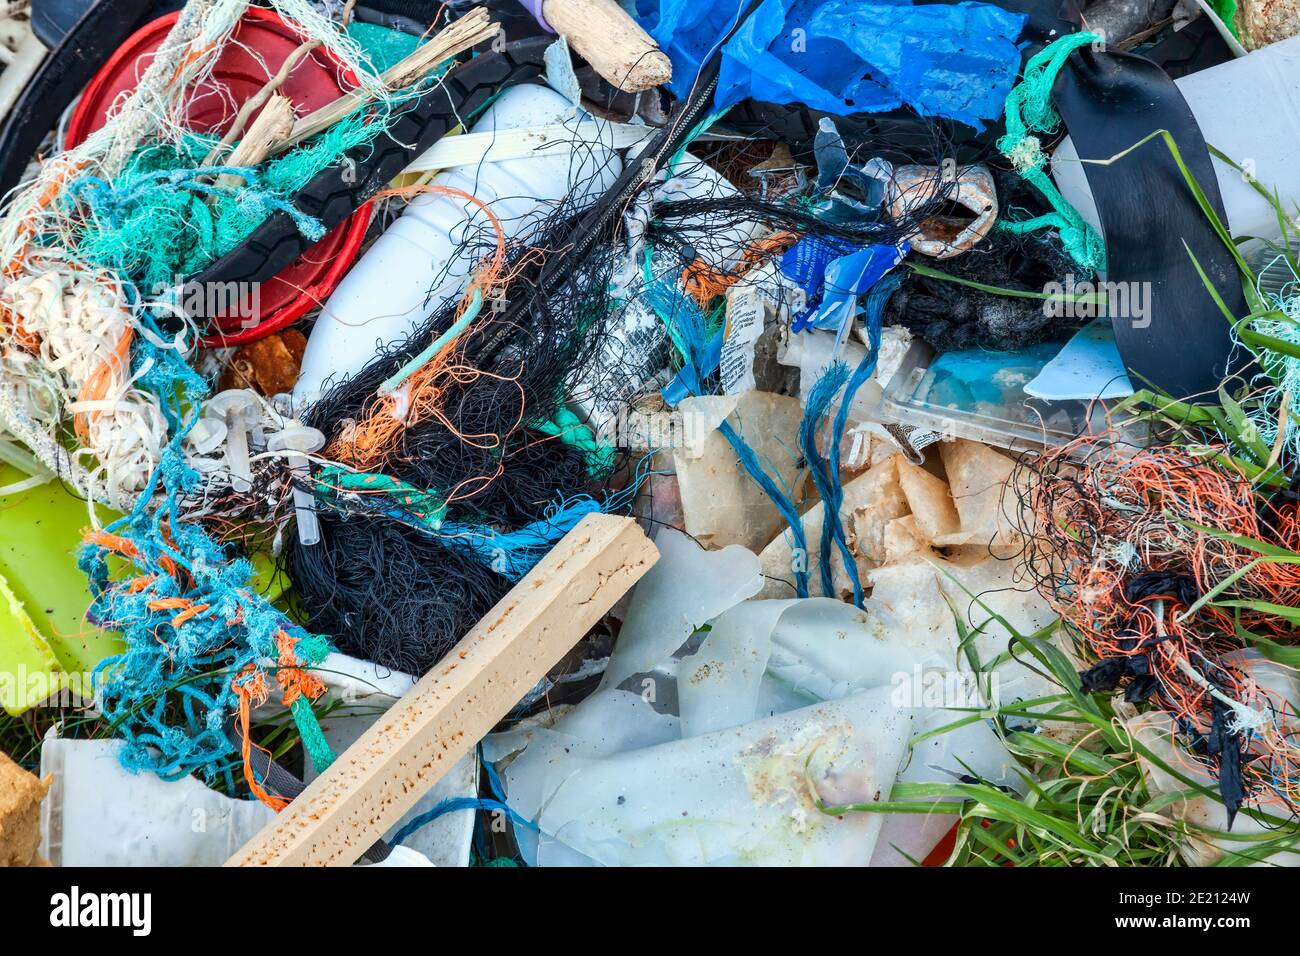 Plastic garbage waste with entangled fishing industry nets on a coastline seaside beach causing sea pollution rubbish and environmental damage, stock Stock Photo